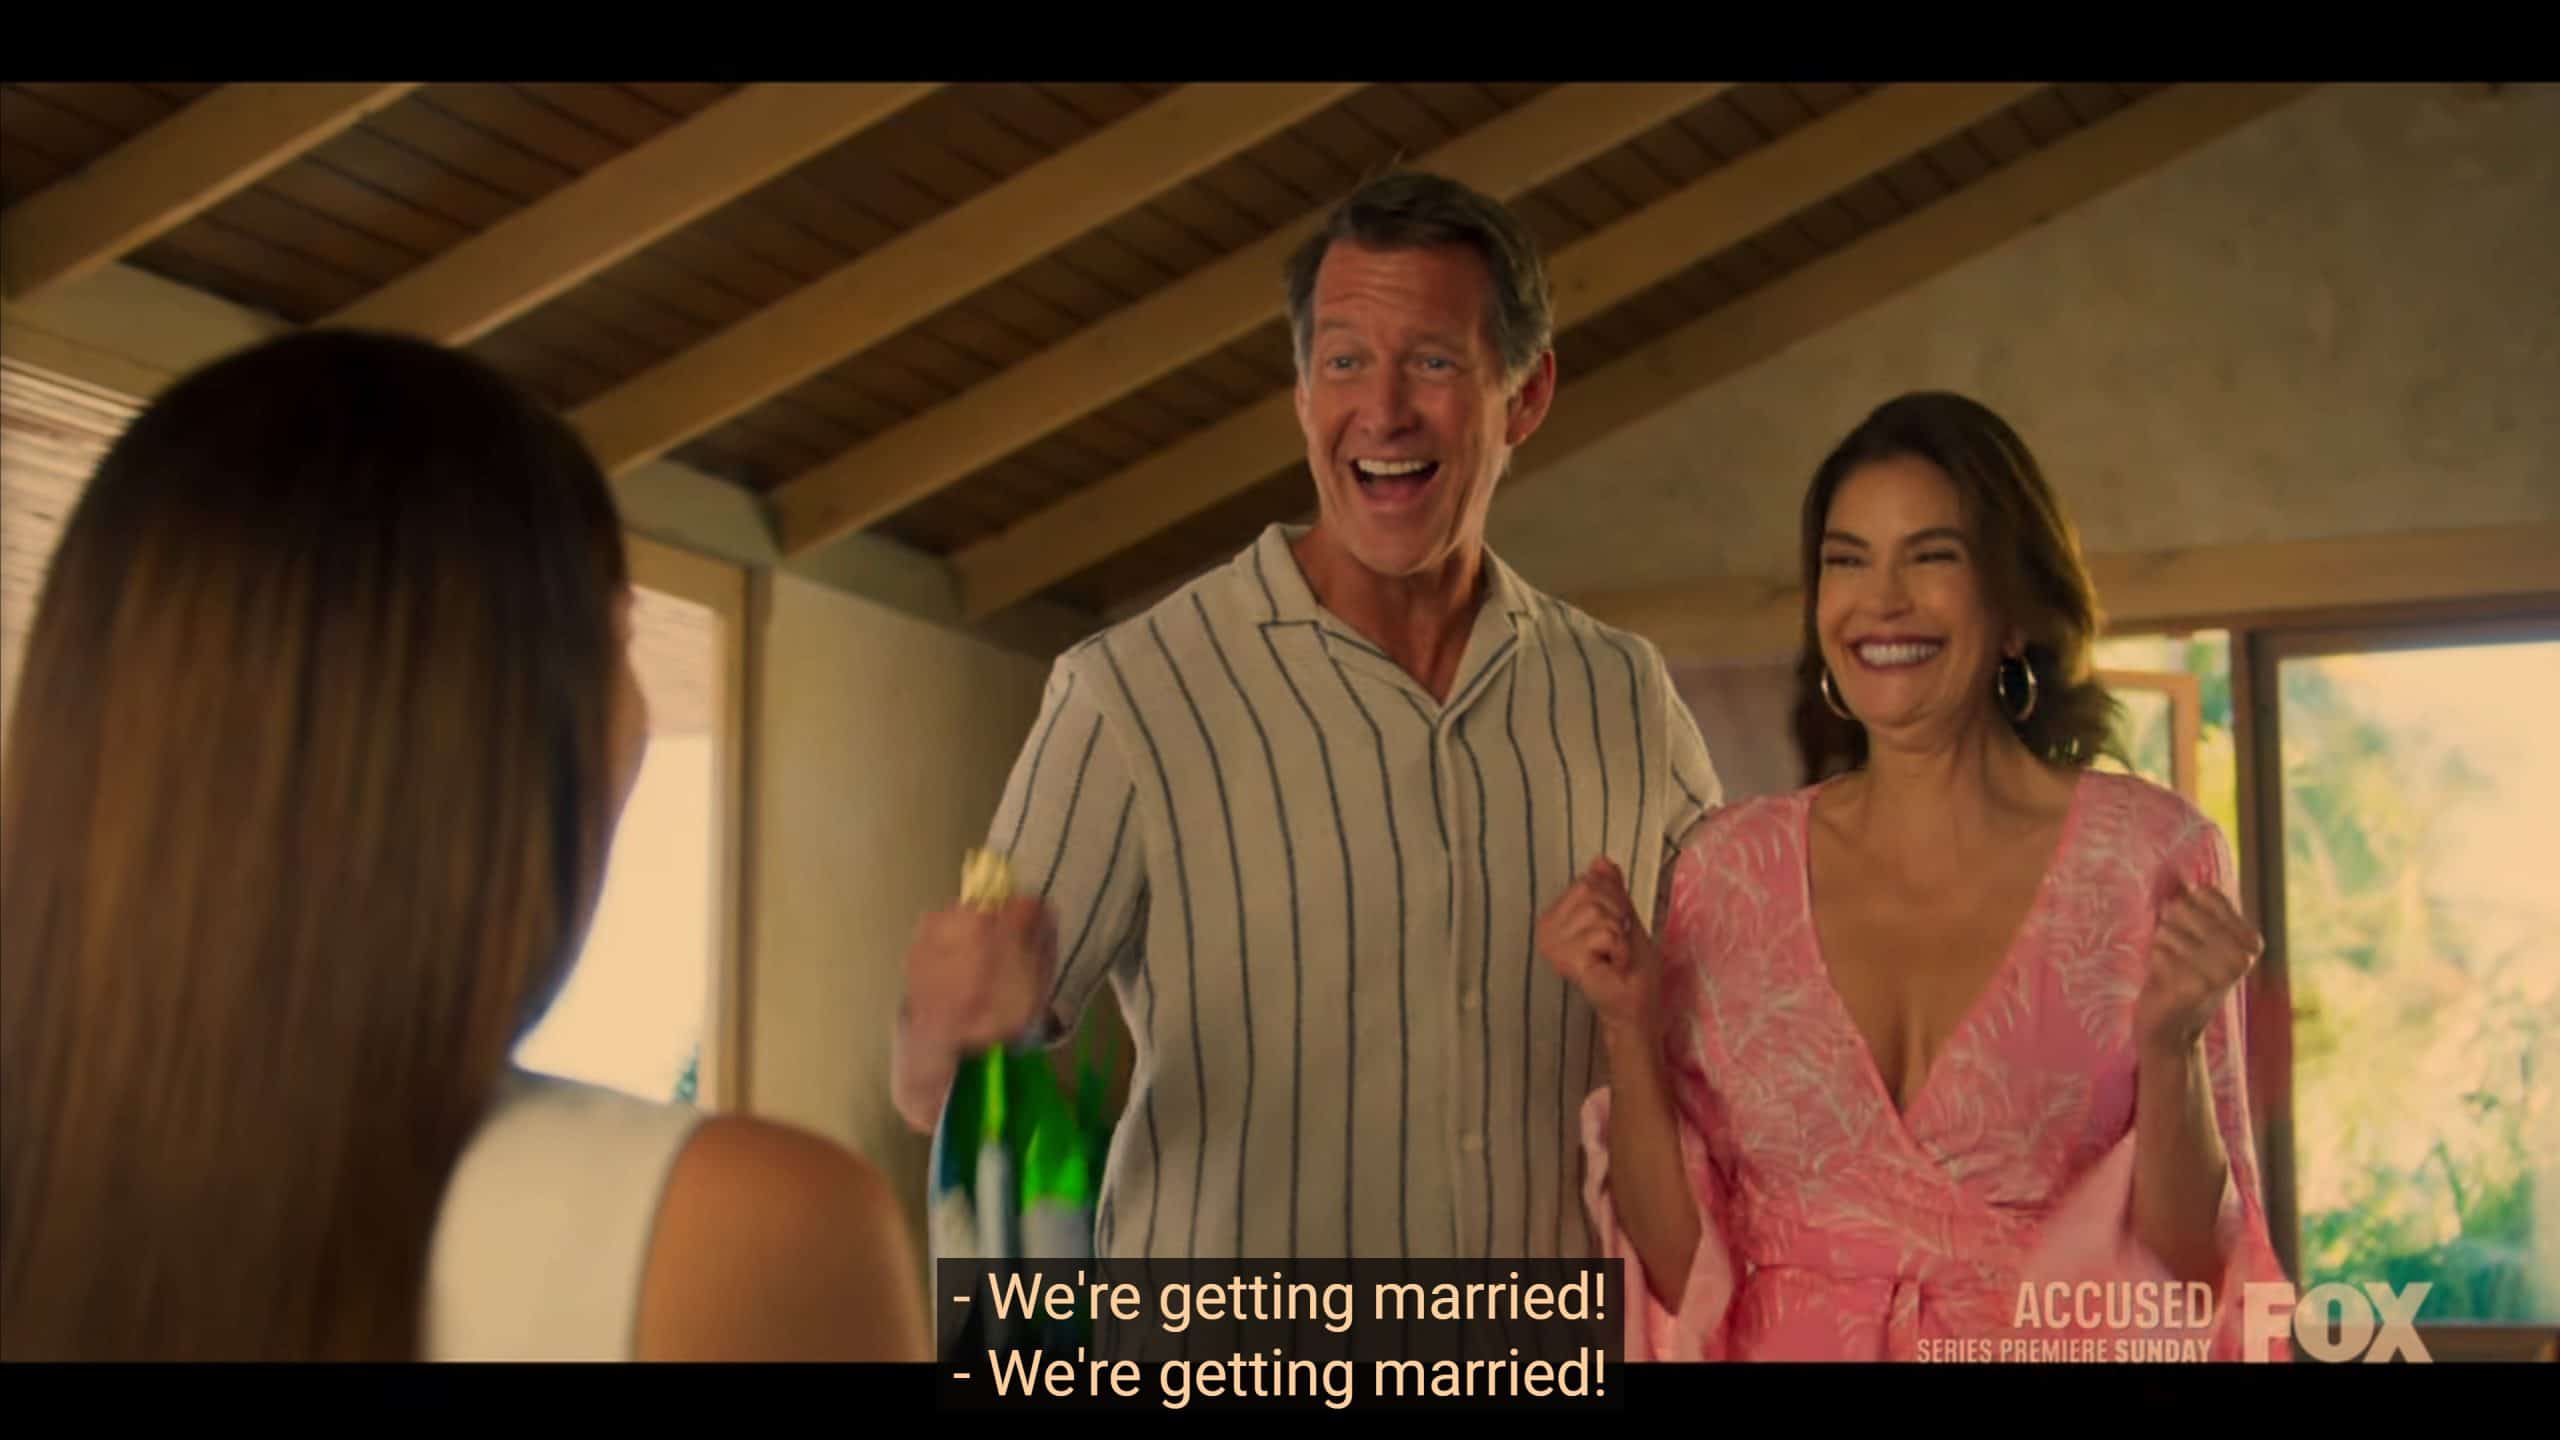 Dutch (James Denton) and Dolly (Teri Hatcher) Paymer announcing they are getting married